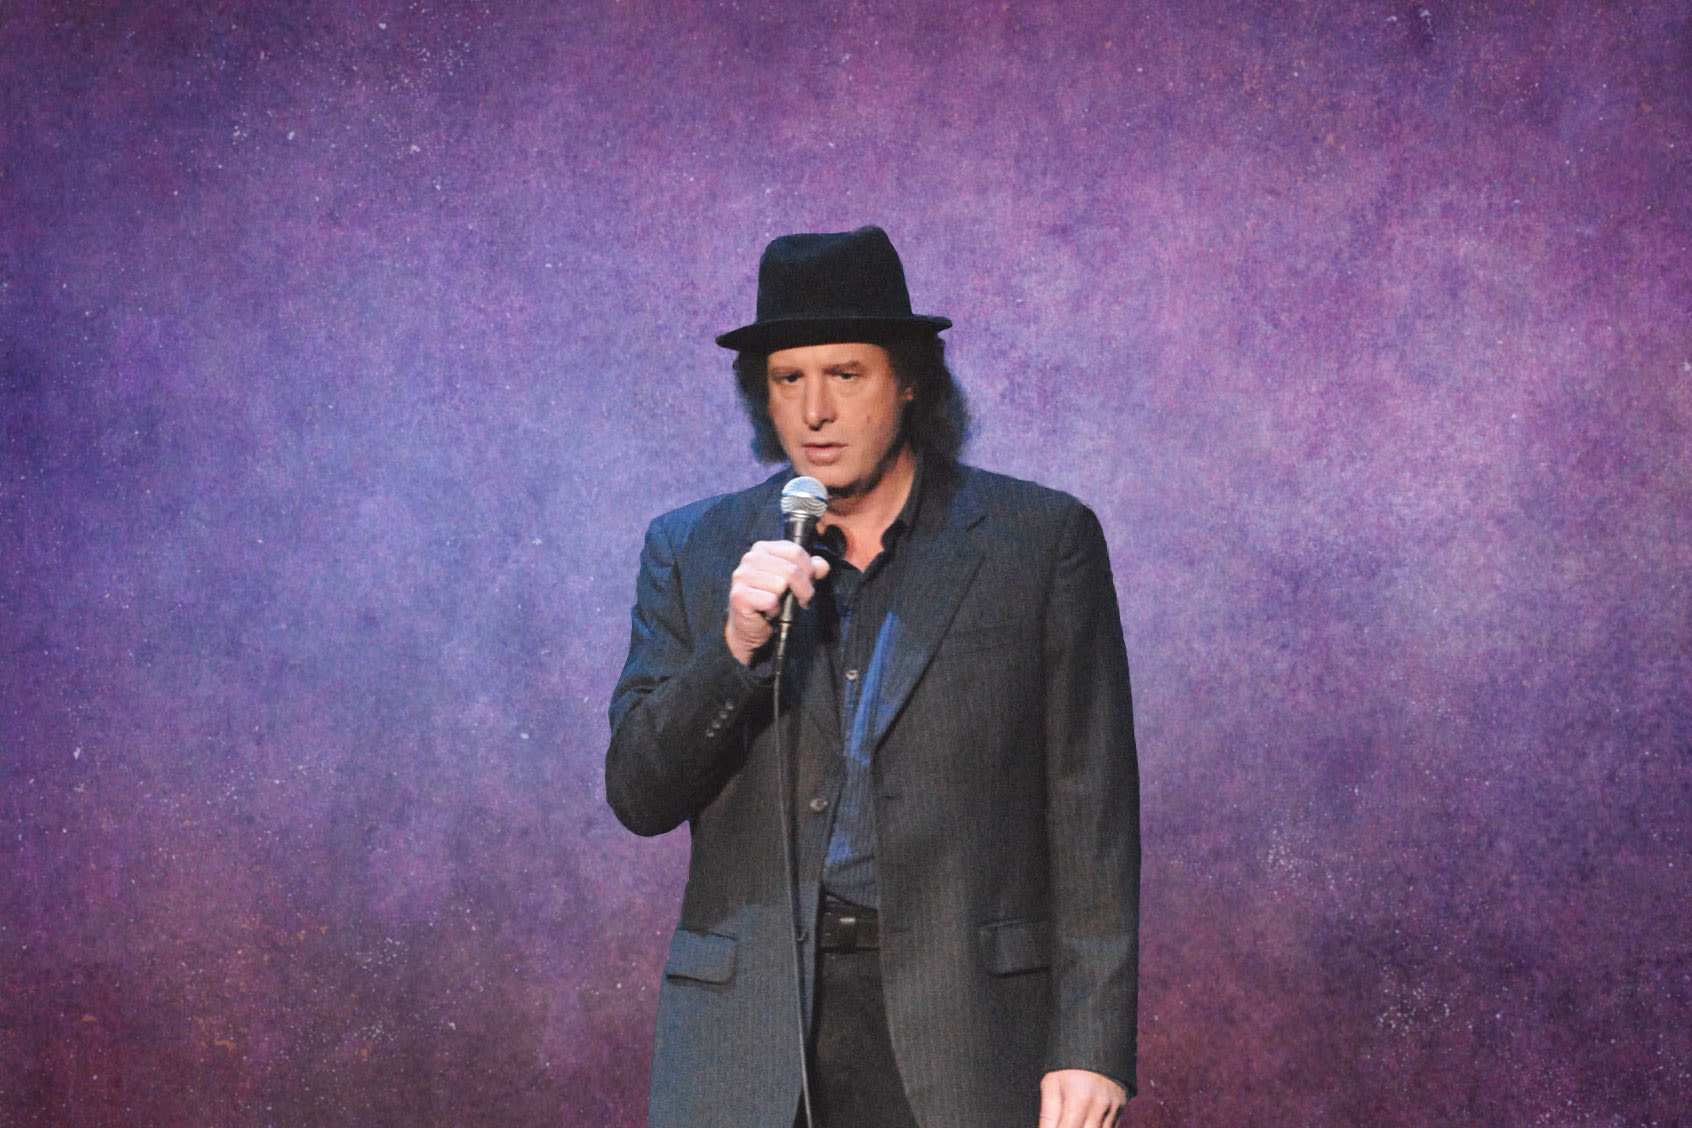 "Gravity is never going to go out of style": Steven Wright on the secret to comedy longevity